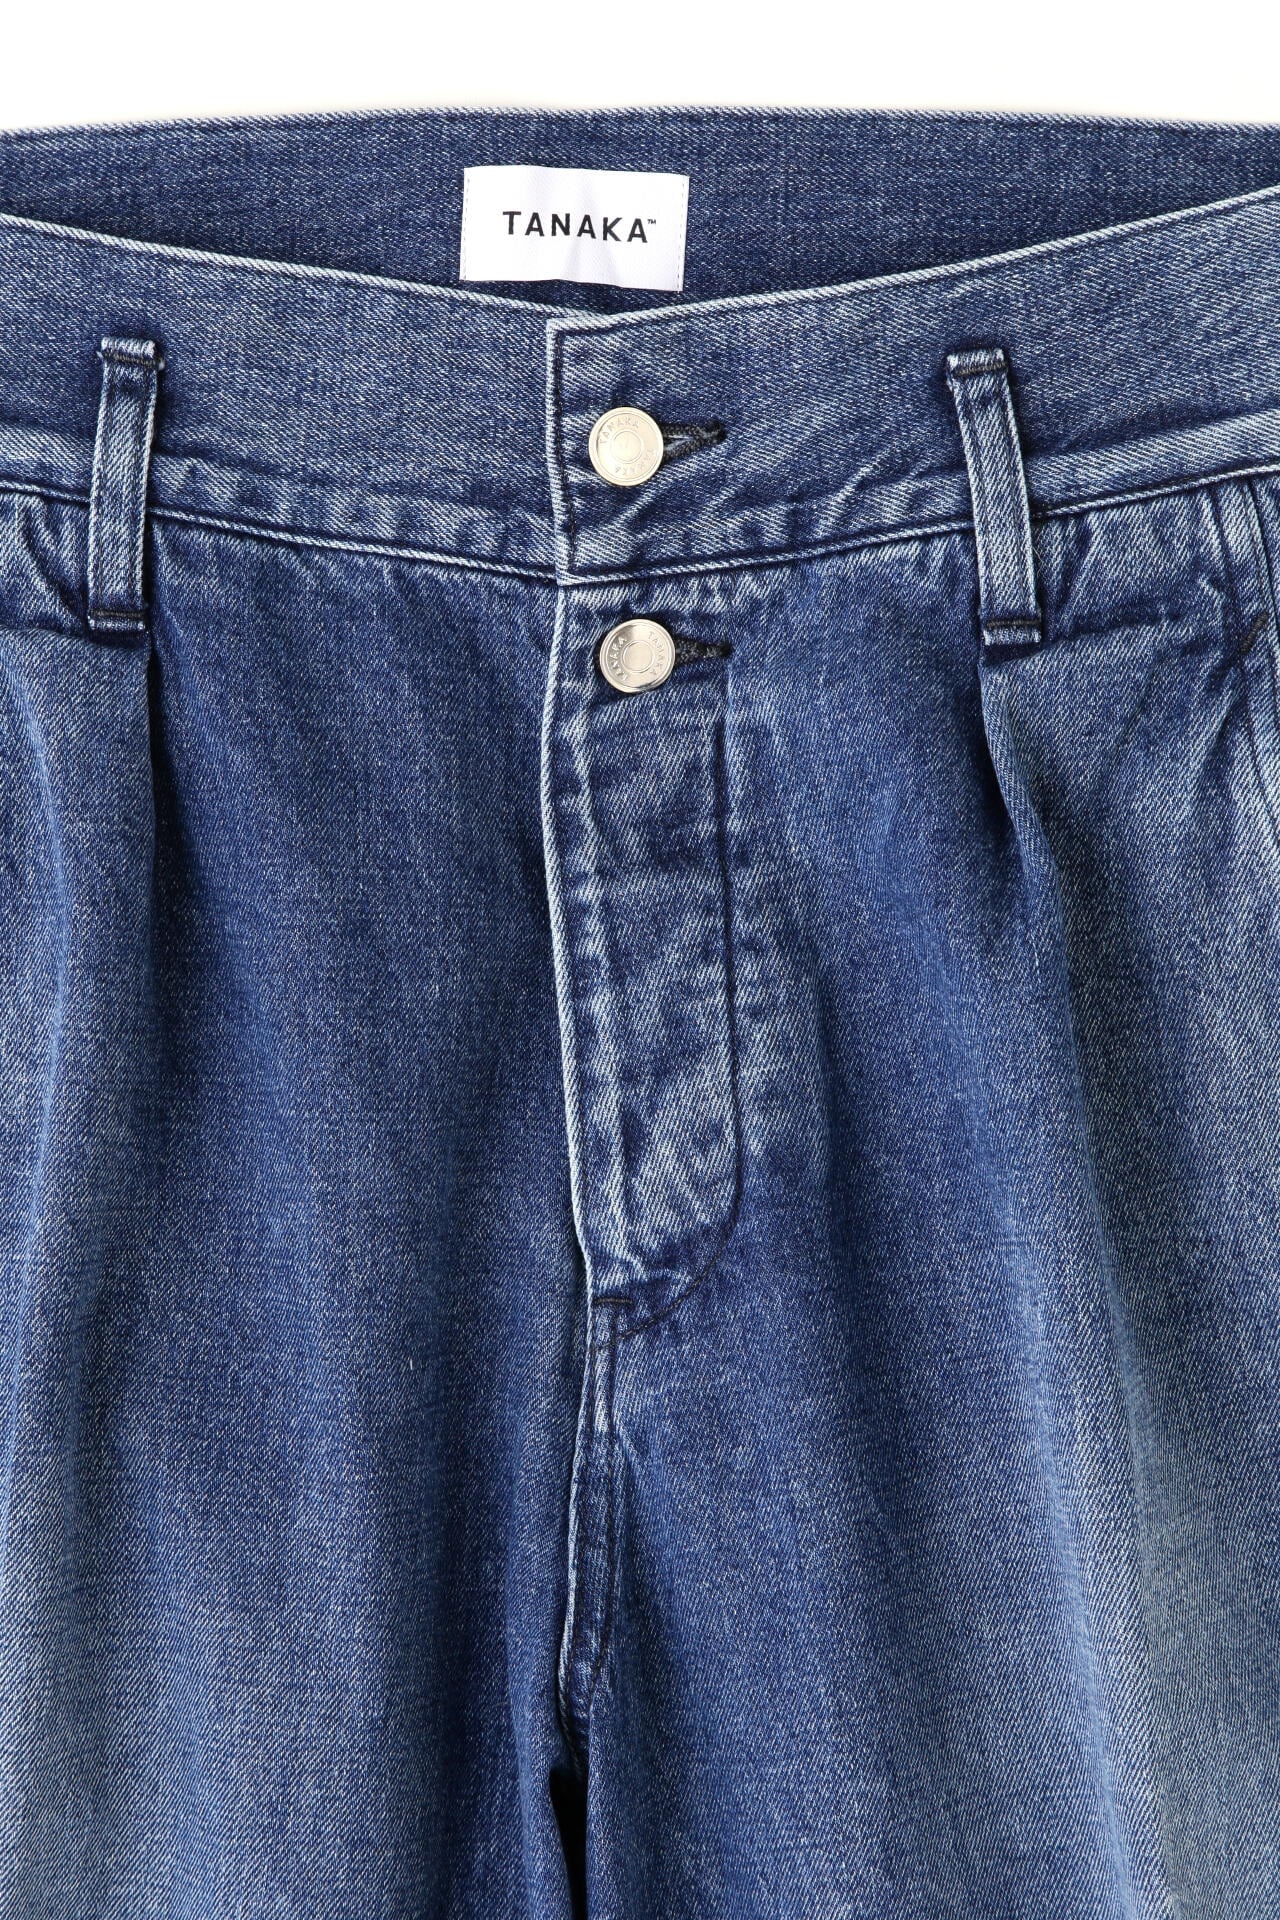 LE PHIL》【TANAKA / タナカ】THE WIDE JEAN TROUSERS || LE PHIL[ル 